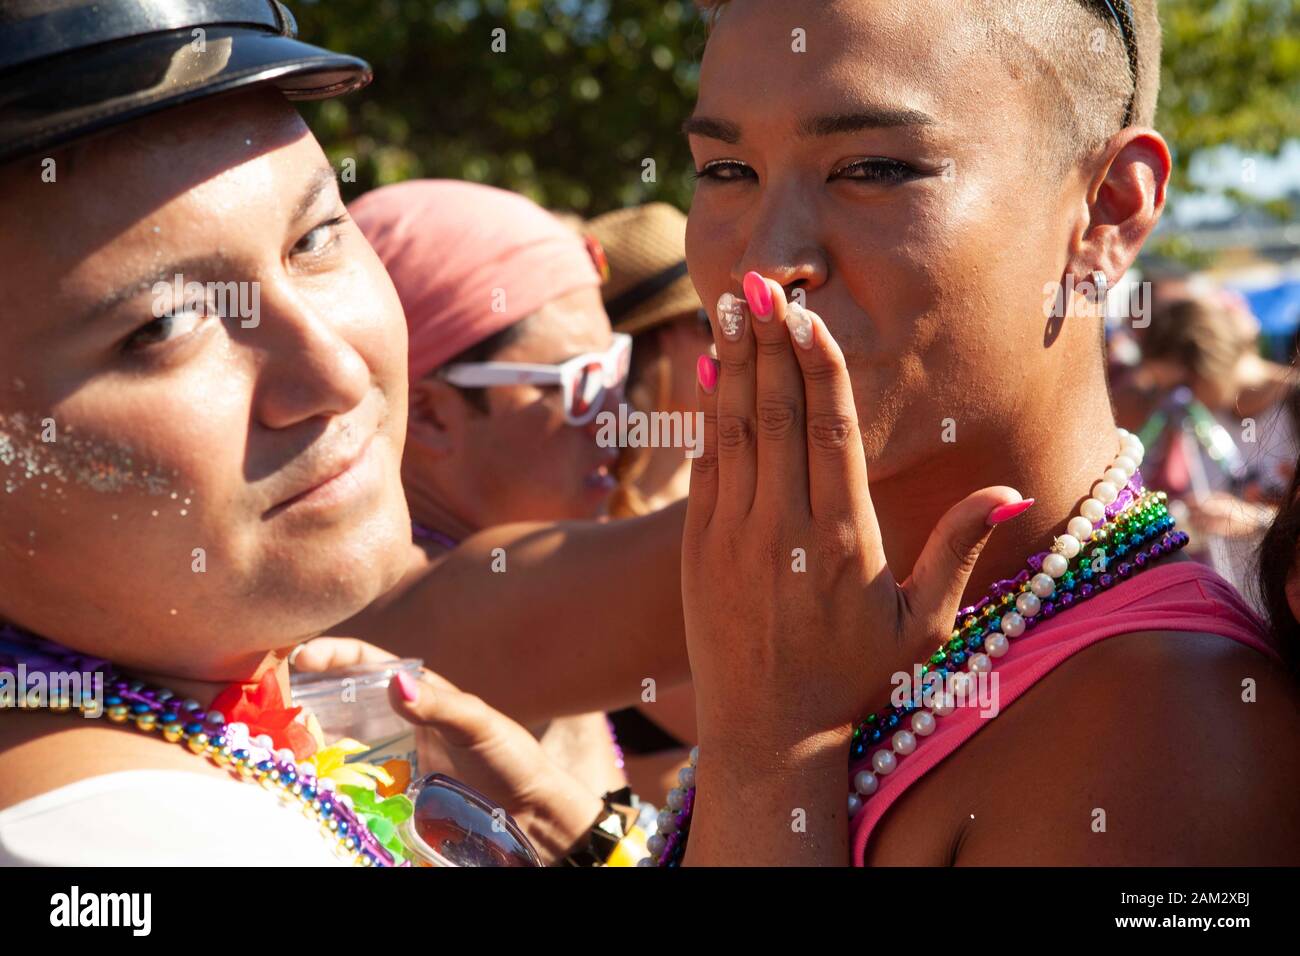 Close up portrait of friends hugging at festival, Vancouver Pride Festival 2014, Vancouver, Canada Stock Photo